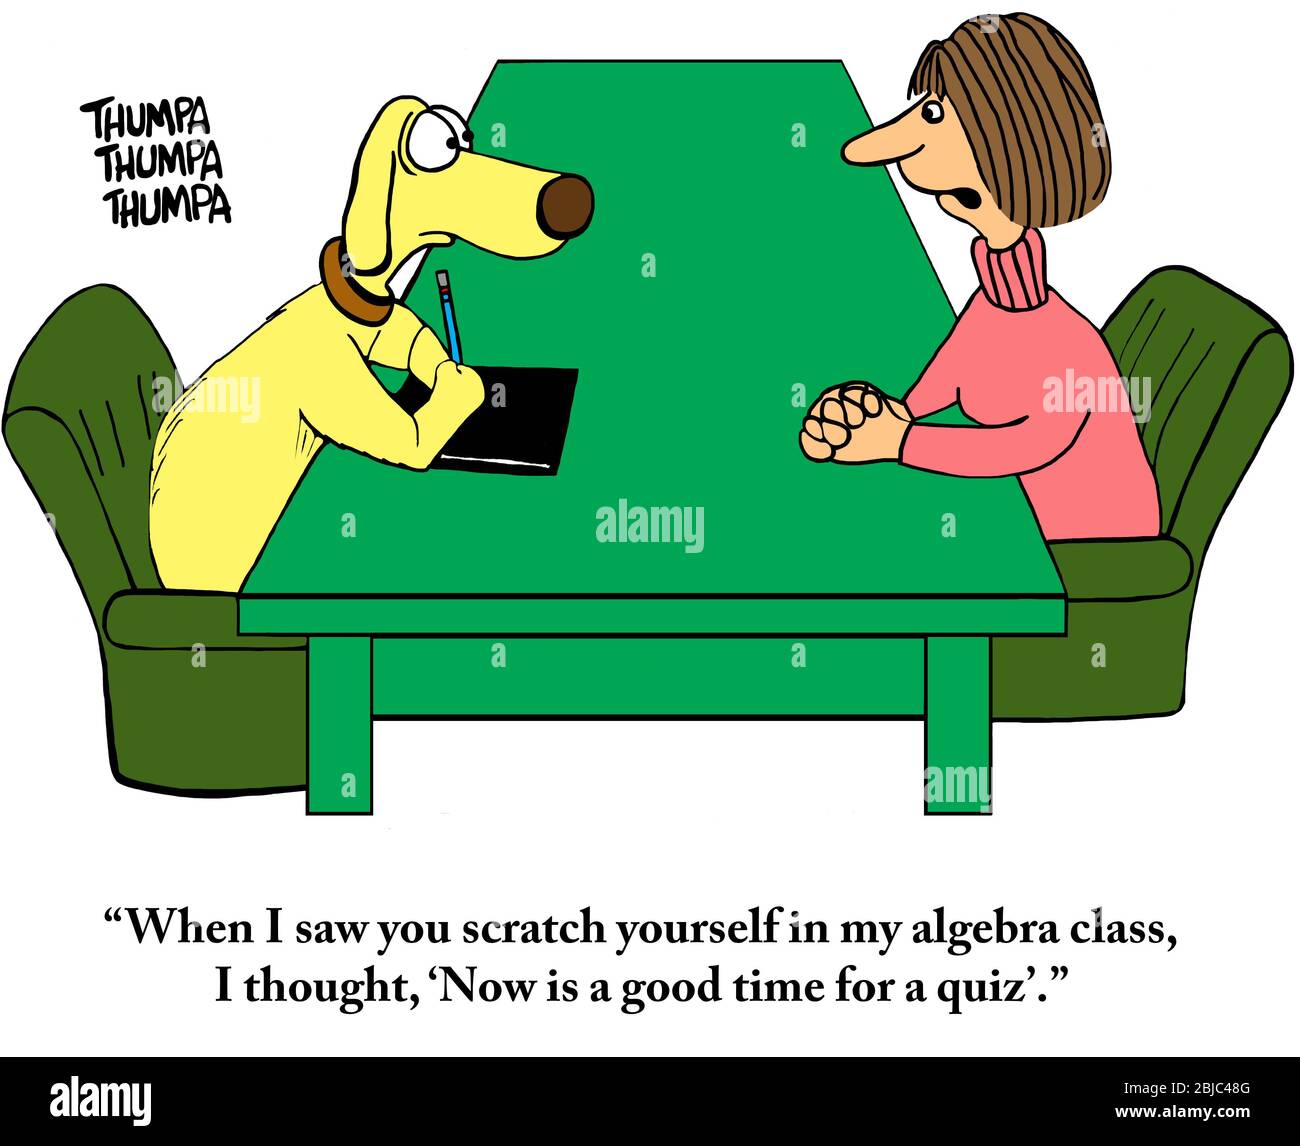 Algebra teacher tells worries student who is a dog that she is about to give him a quiz. Stock Photo